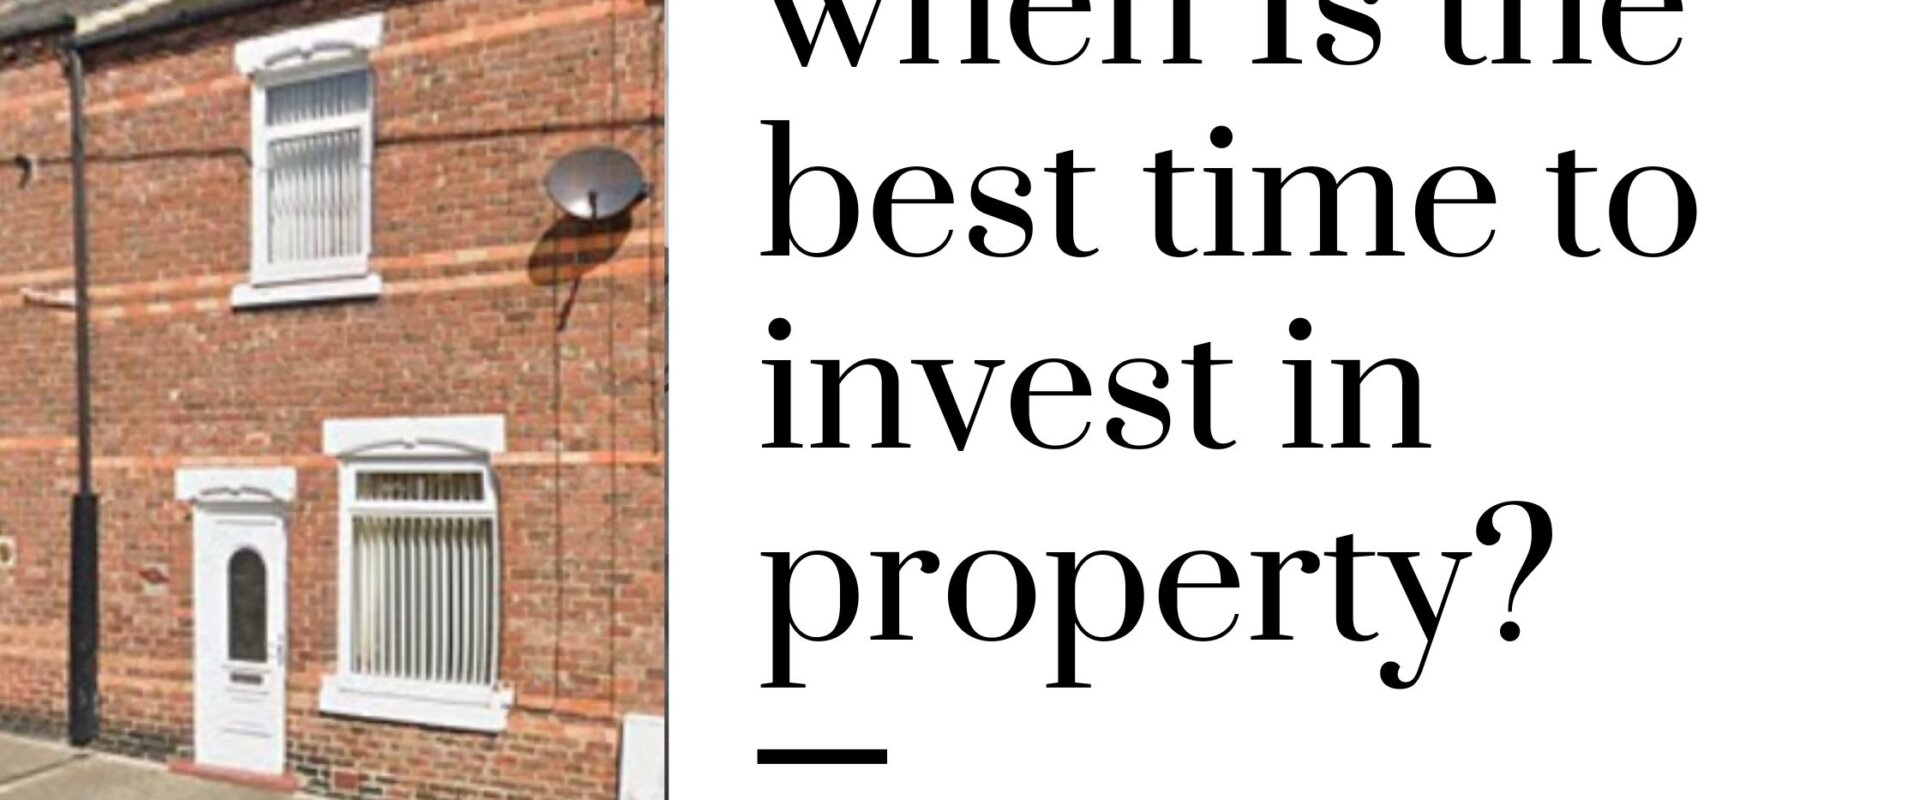 When is the best time to invest in property?